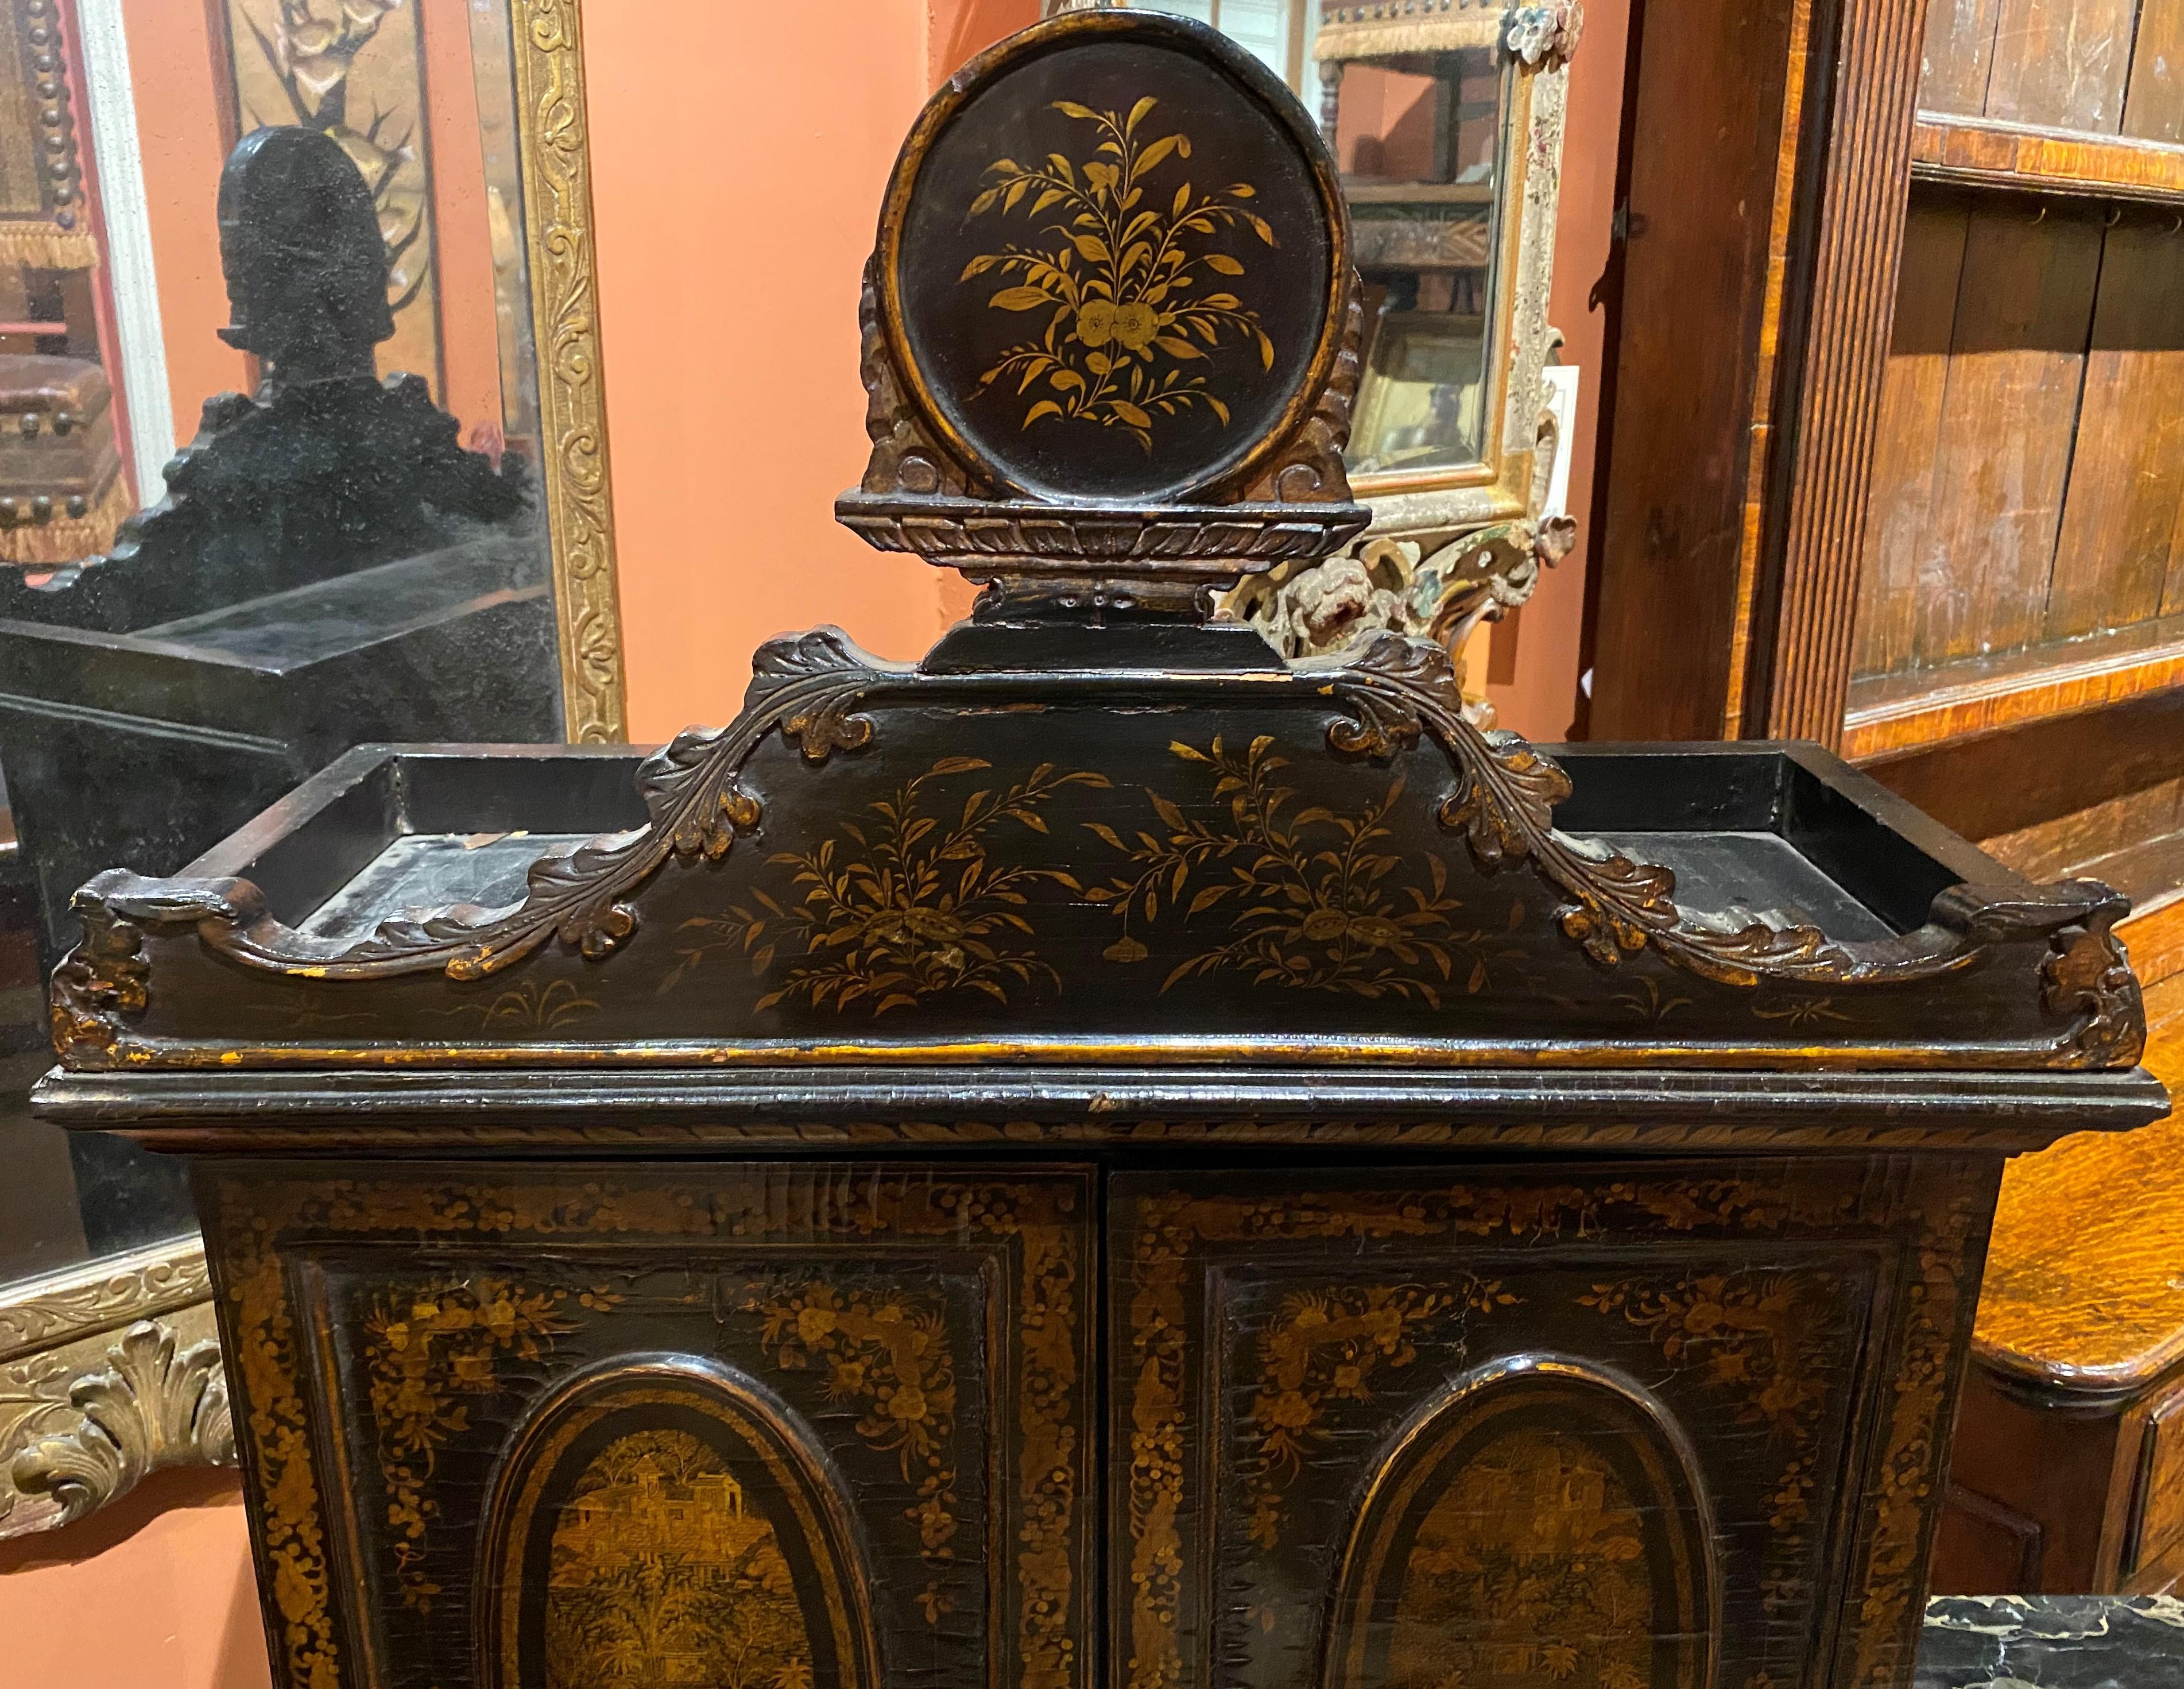 A fine three-piece diminutive black lacquer secretary desk with extensive chinoiserie or japanned decoration, including a base table, brass-handled lap desk, and two door cabinet with compartmentalized interior. The cabinet has a carved crest with